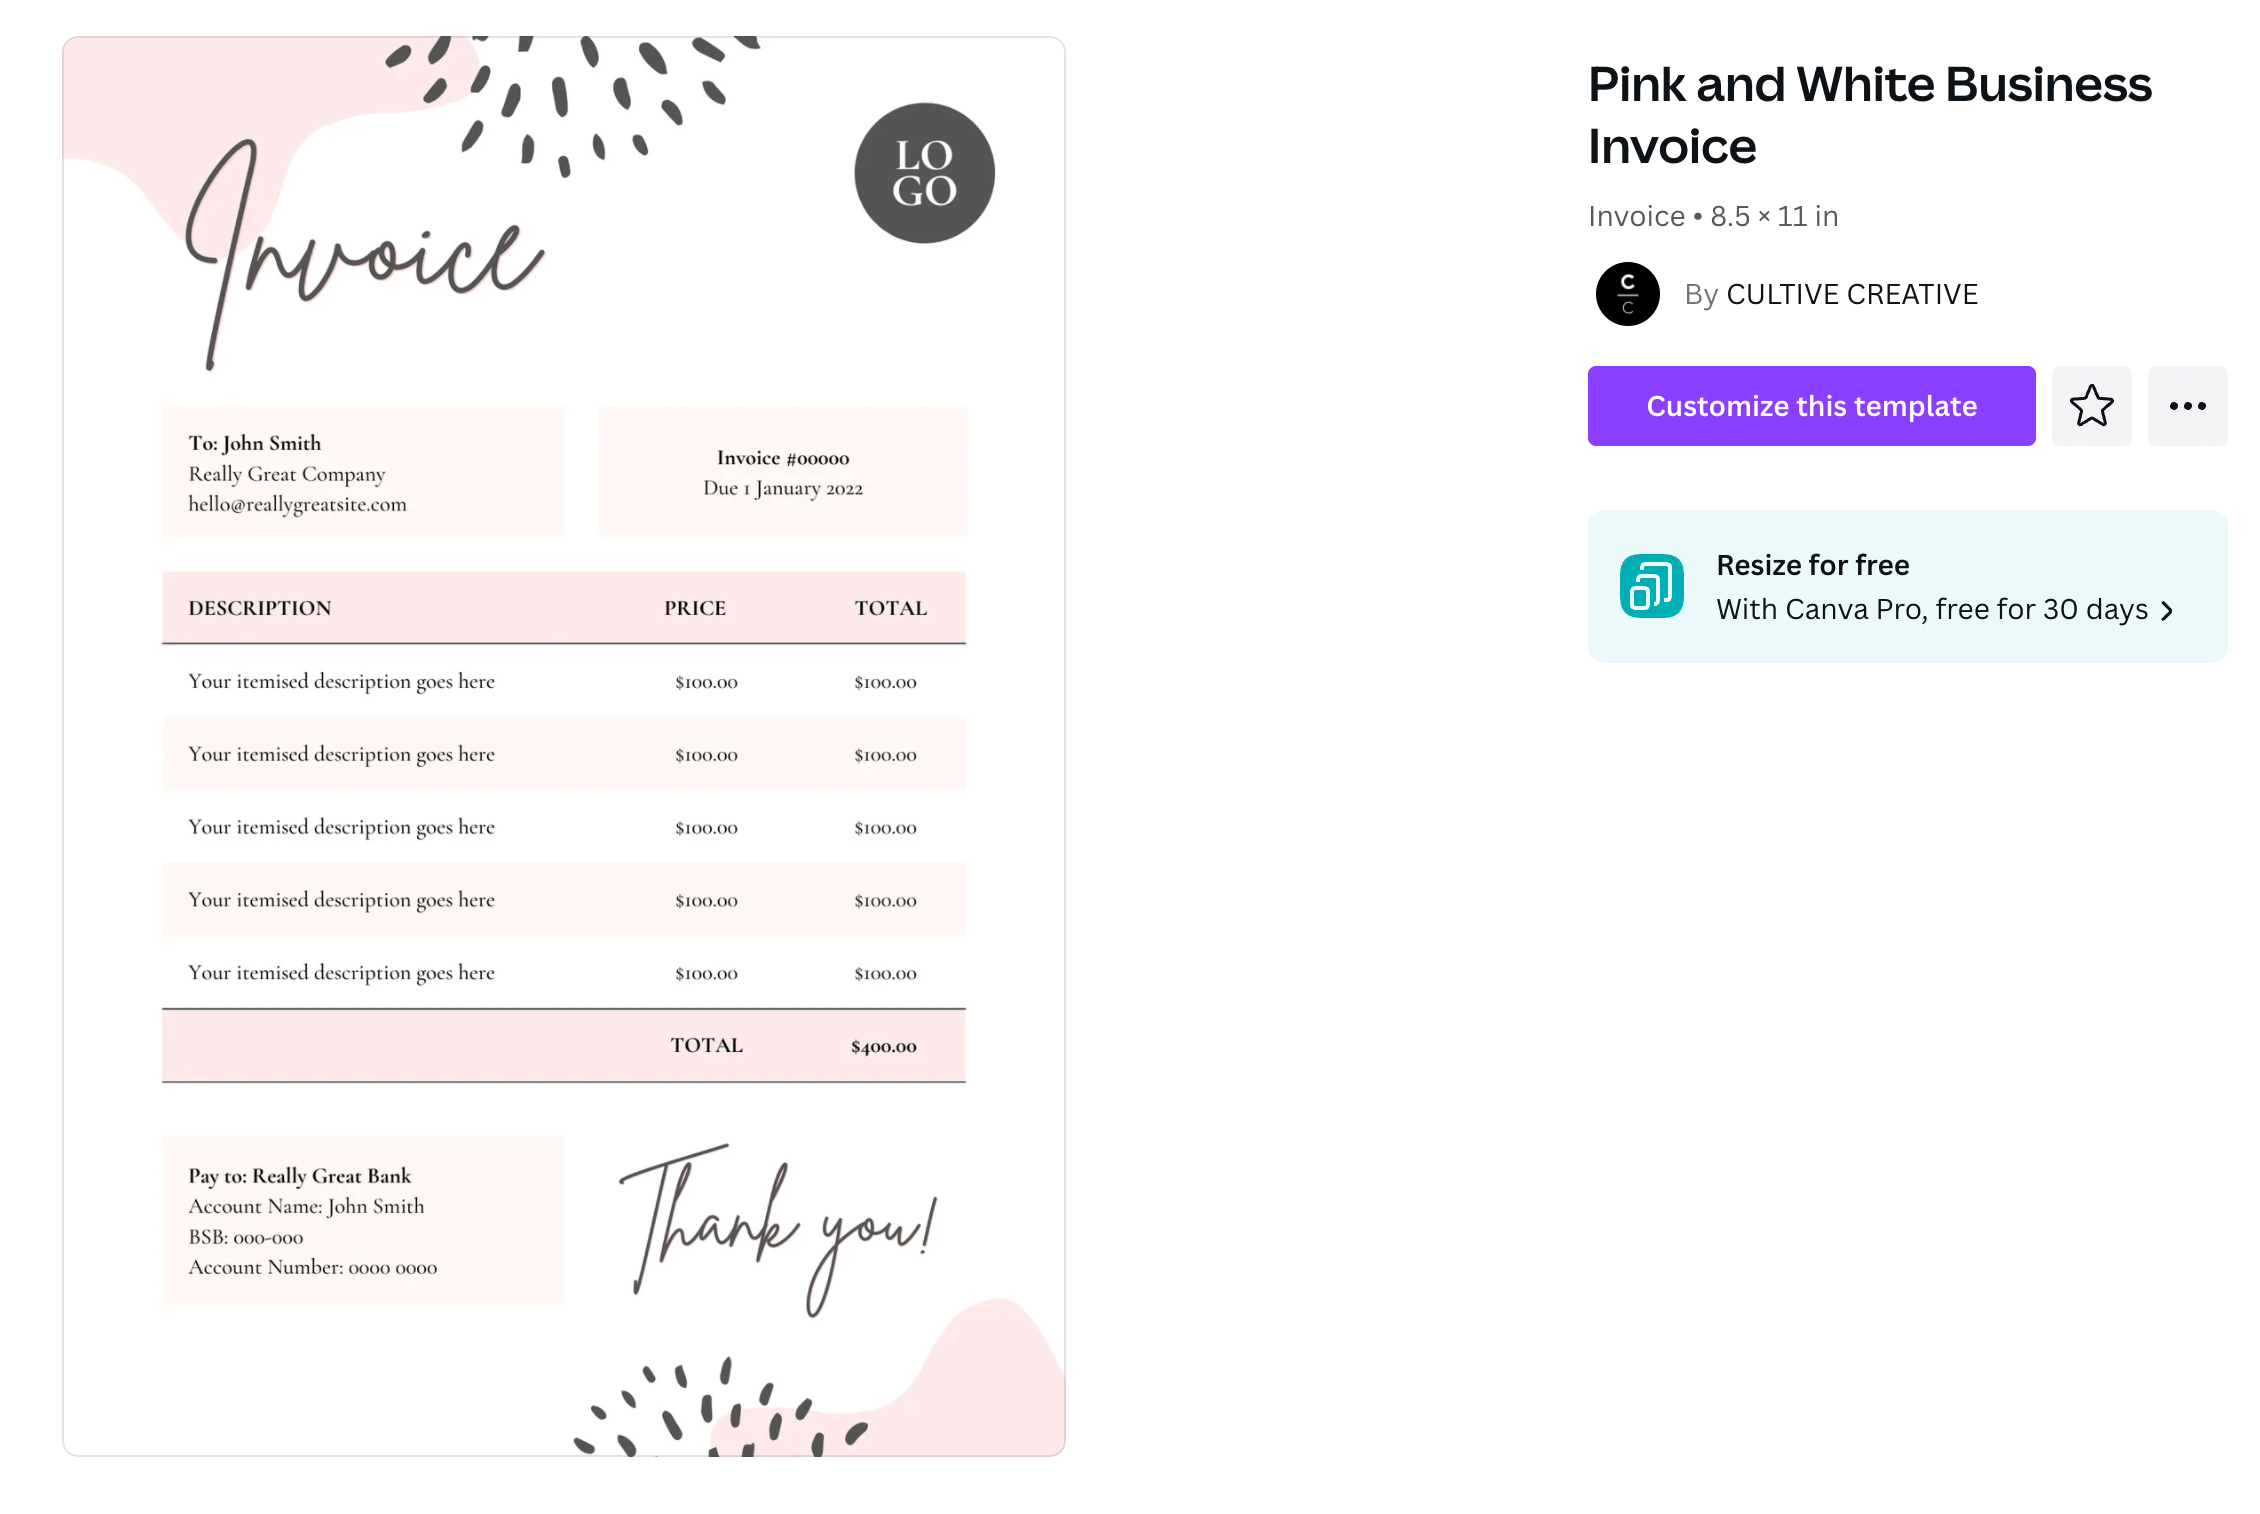 An invoice template with pink decorative accents